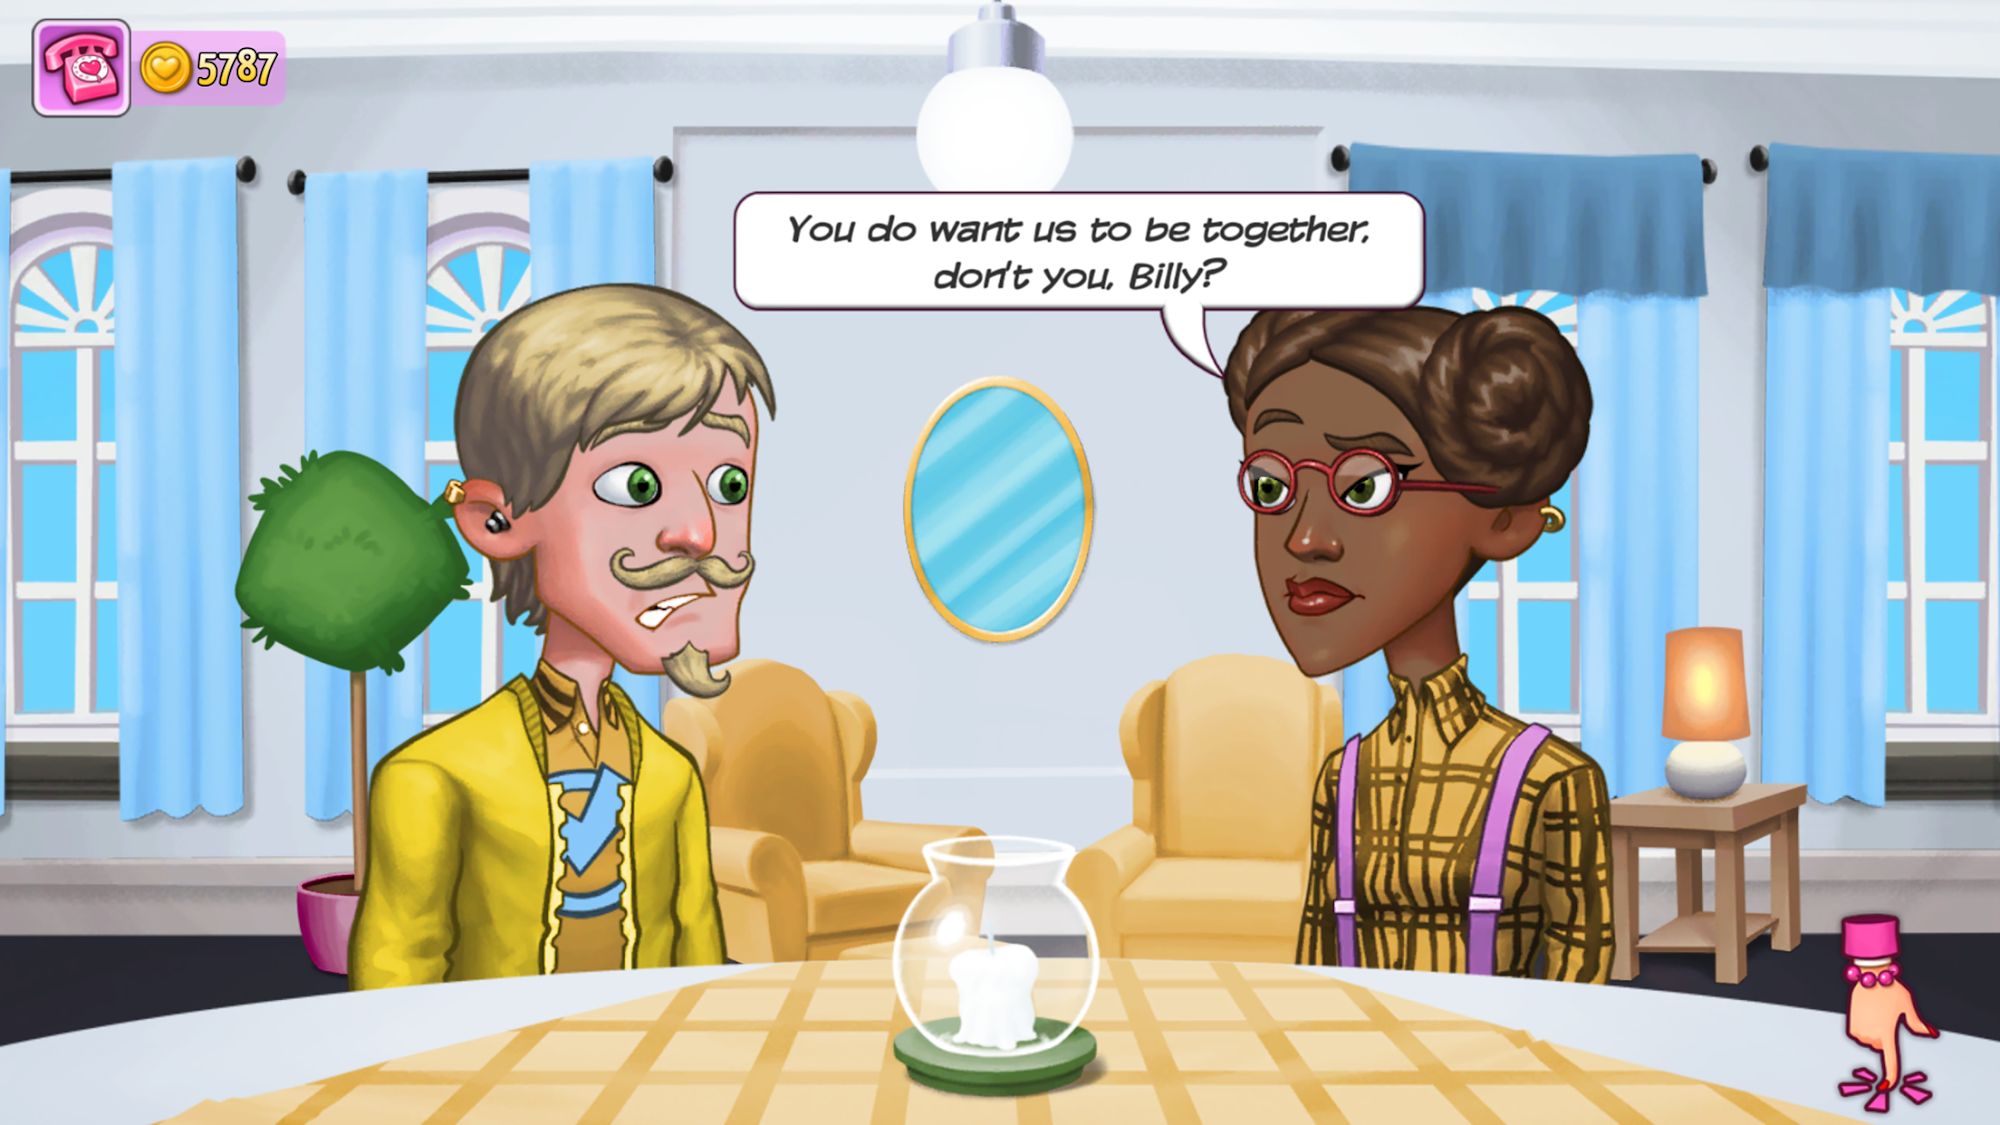 Gameplay of the Kitty Powers' Love Life for Android phone or tablet.